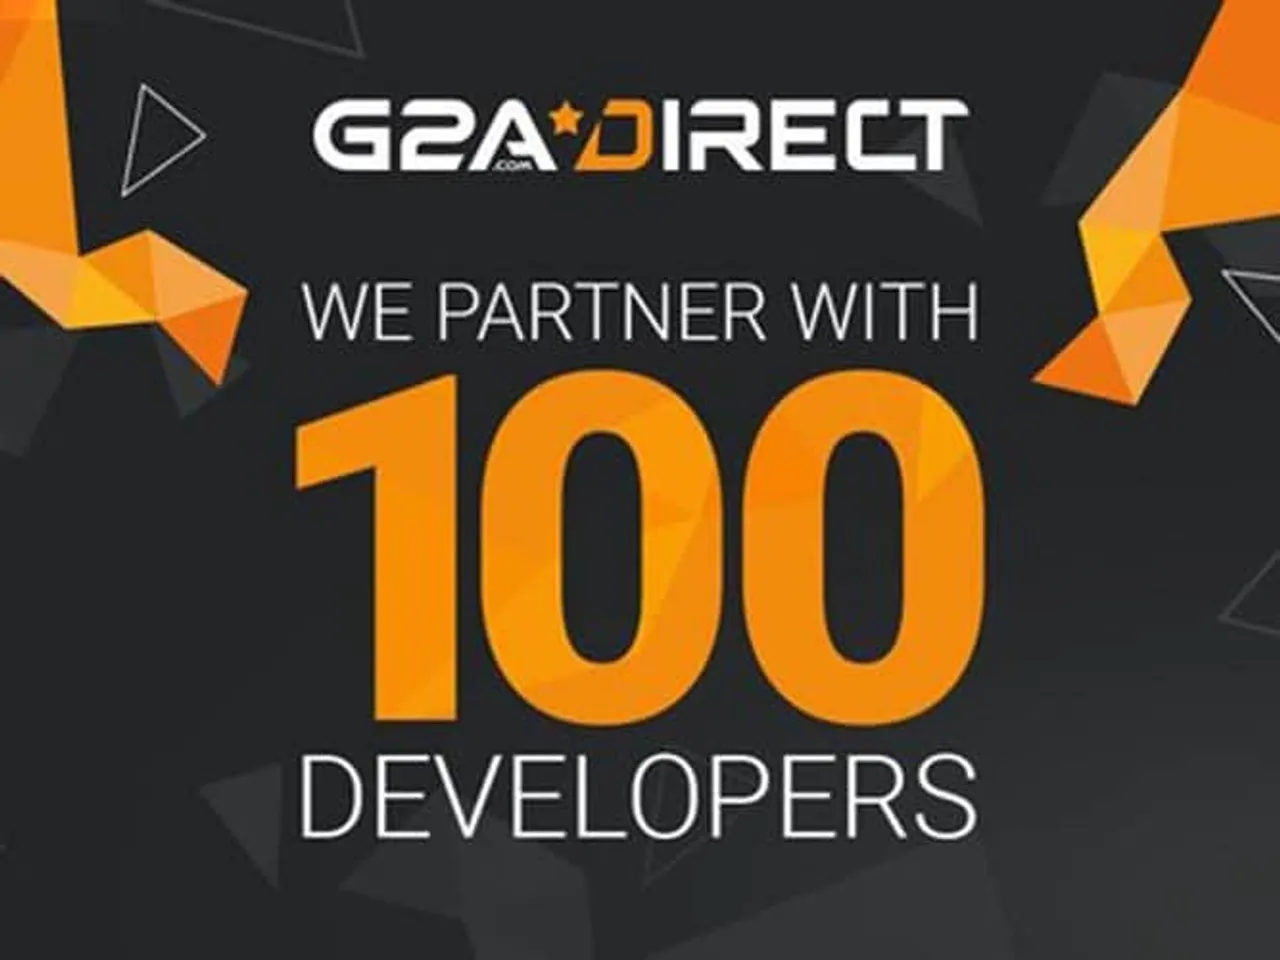 G A Direct Developers image